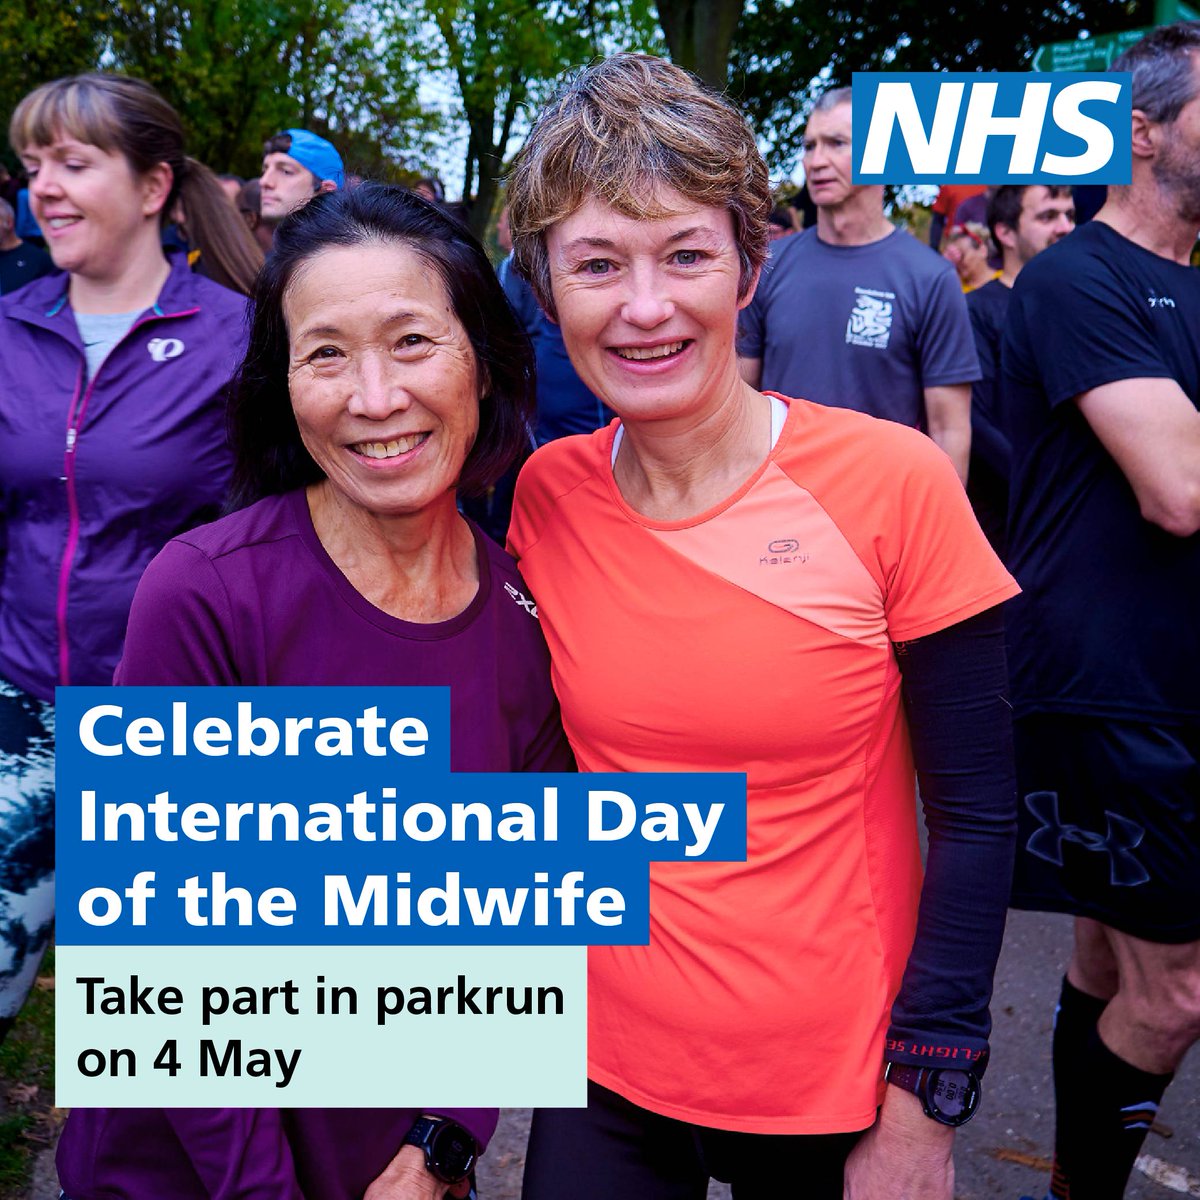 Only one week to go until I run @parkrunUK on 4 May in celebration of the International Day of the Midwife #IDM2024 💙 If you haven’t done so already, there’s still time to register for your local event: parkrun.org.uk/register/